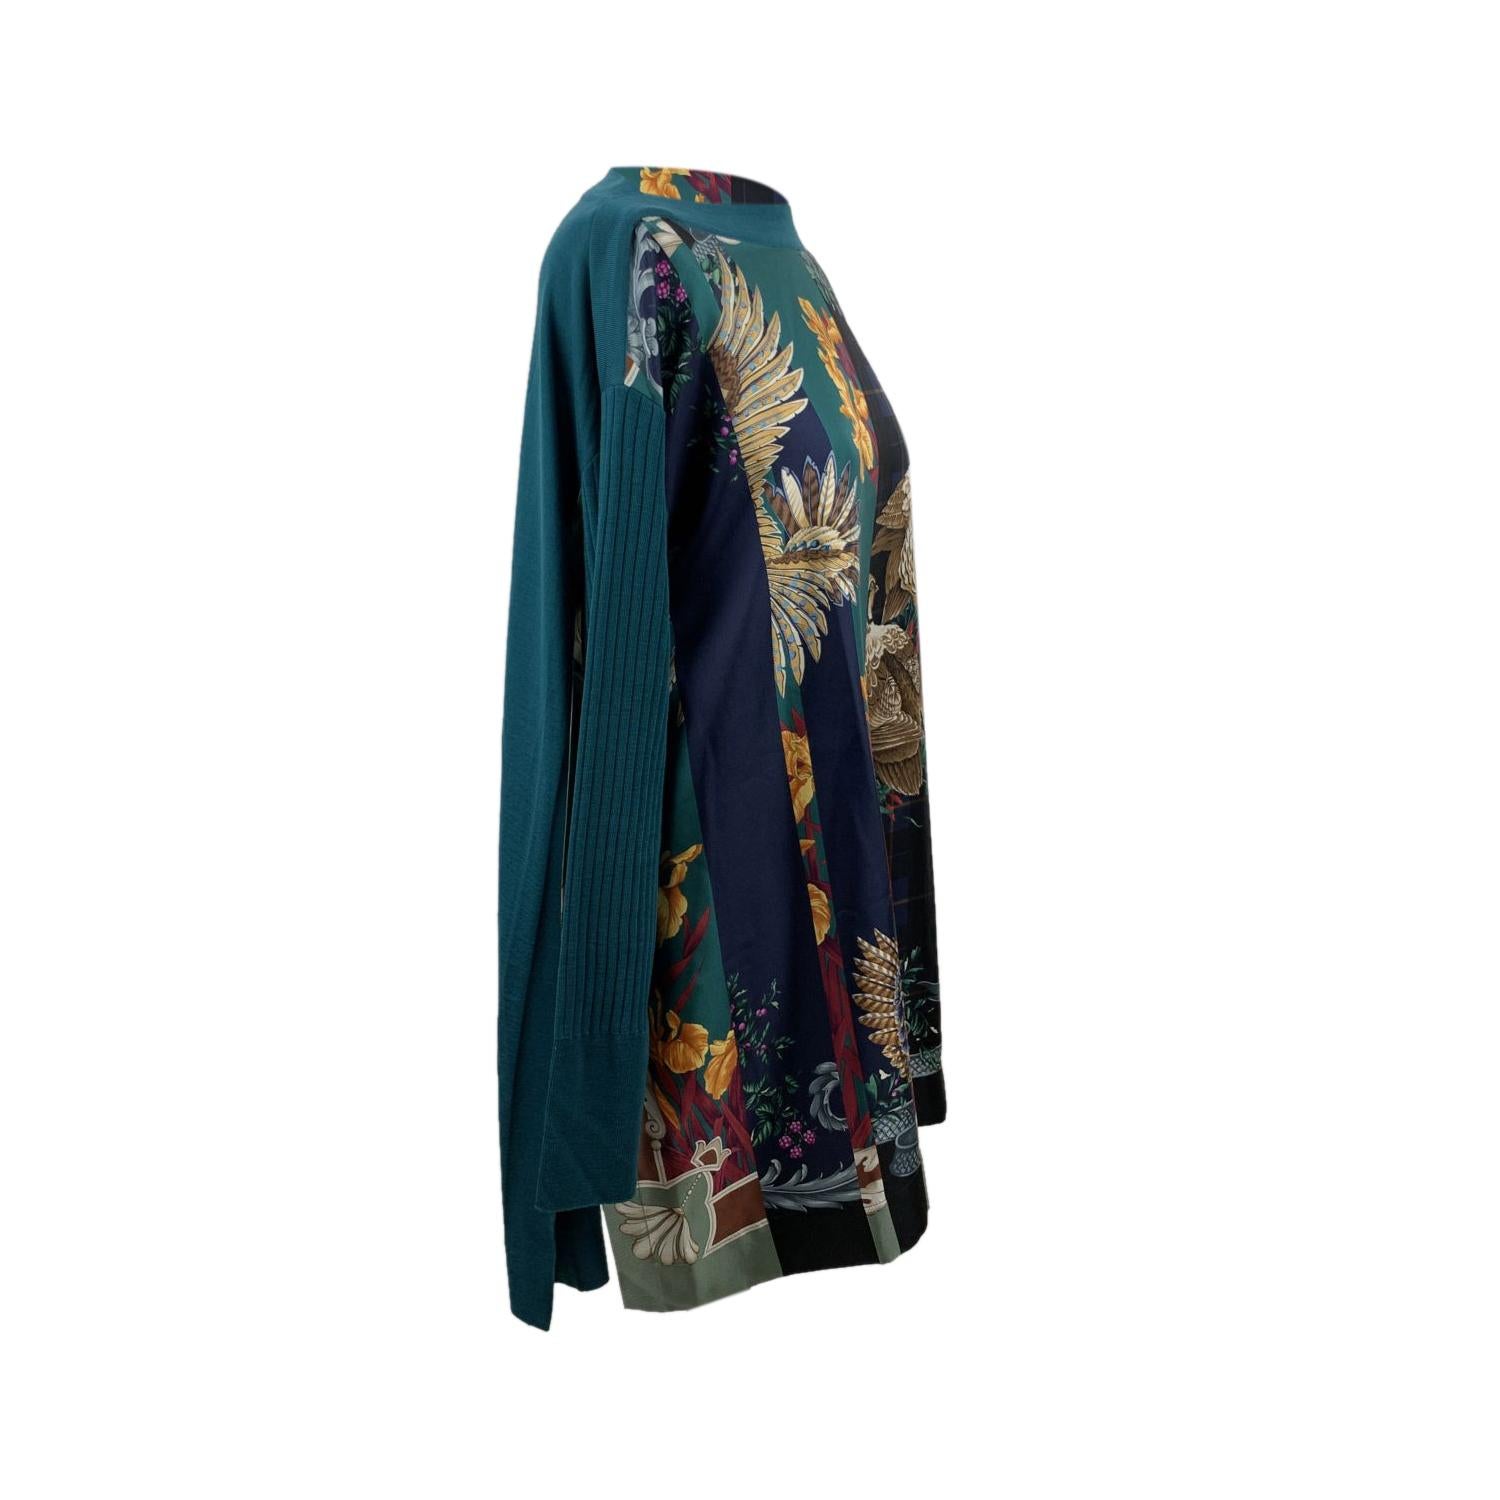 Salvatore Ferragamo green patchwork 'Peacock' printed blouse. Boat neckline. Long sleeve styling . Long length. Composition: 100% silk. - 100% wool. Size: L (The size shown for this item is the size indicated by the designer on the label). Made in